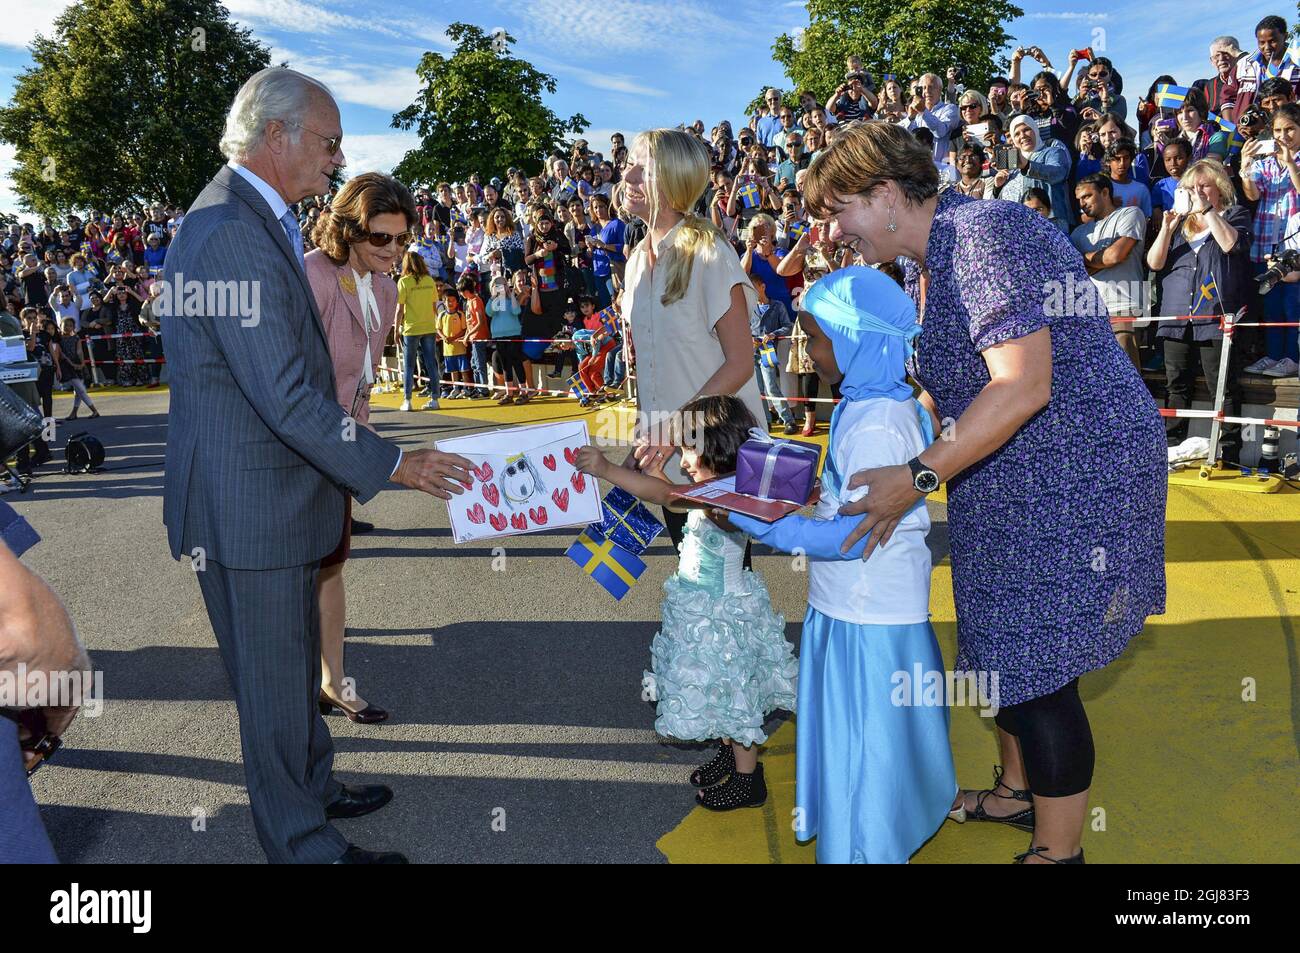 LINKOPING 20130903 King Carl Gustaf and Queen Silvia meet children during a visit to Ryd's activity park in Linkoping, Sweden, September 3, 2013. The visit is a part of the Kings ongoing 40 year anniversary on the throne. Foto:Jonas Ekstromer / SCANPIX / Kod 10030  Stock Photo